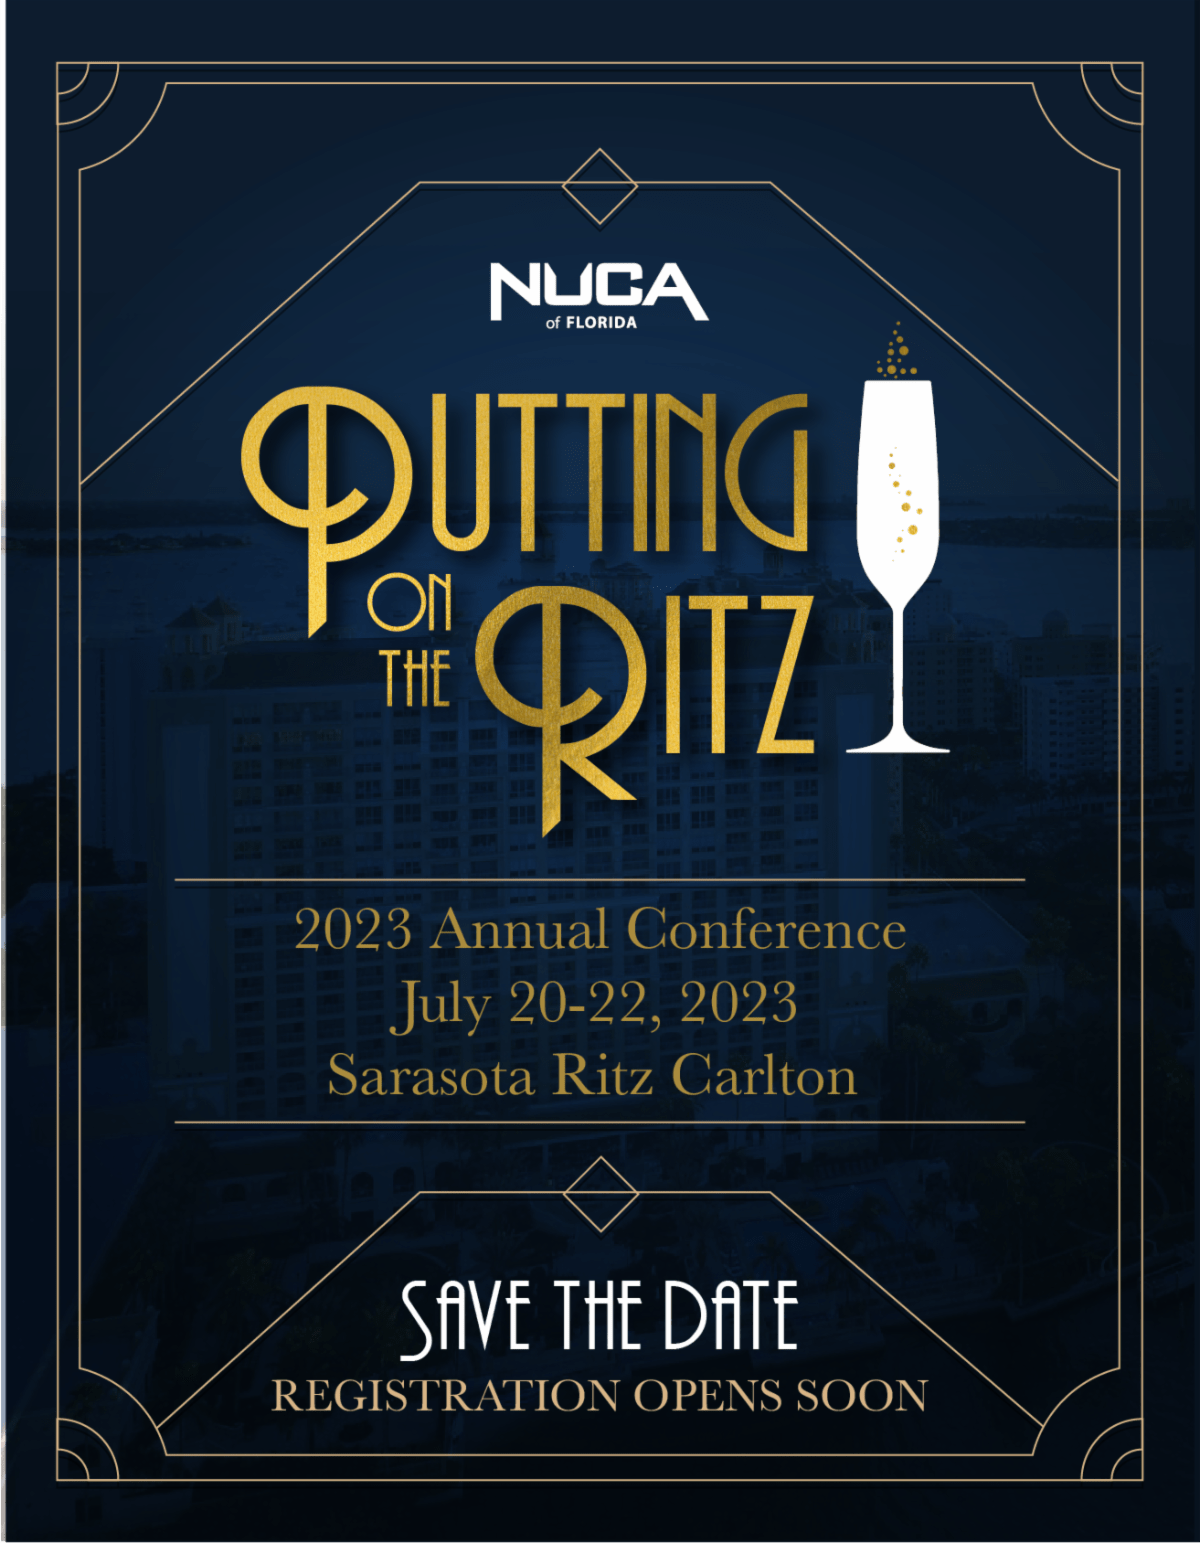 NUCA of Florida Annual Conference 2023